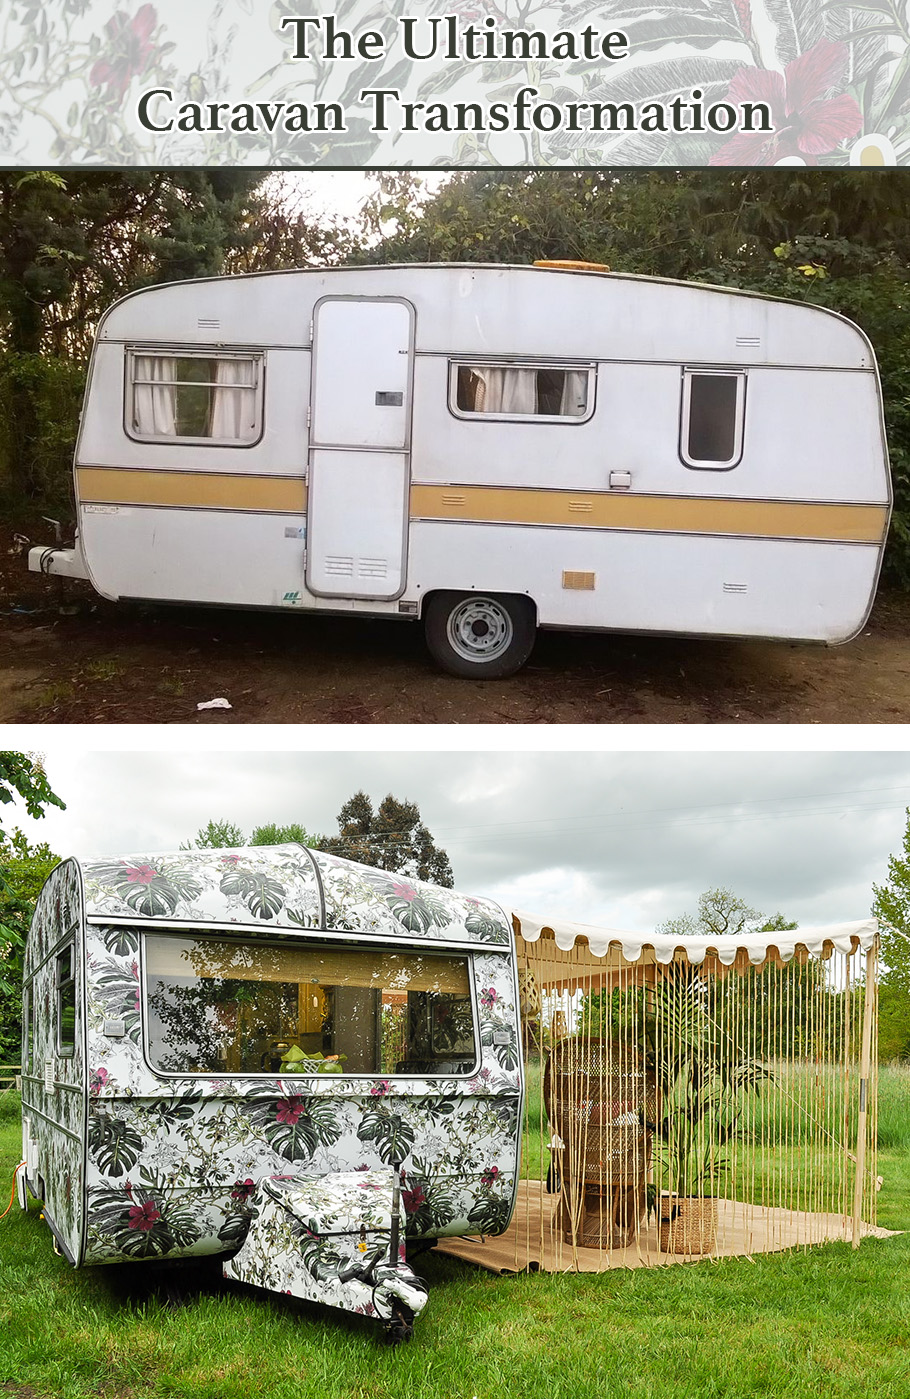 Glamorous, trendy and visually stunning are not words you hear too often in the caravan world. But along came ‘Brigitte’ – the glamavan who now calls St Tropez her home. Bought for £250 from eBay and transformed into a bohemian paradise by her owner, interior designer and blogger, Jane Ashton.